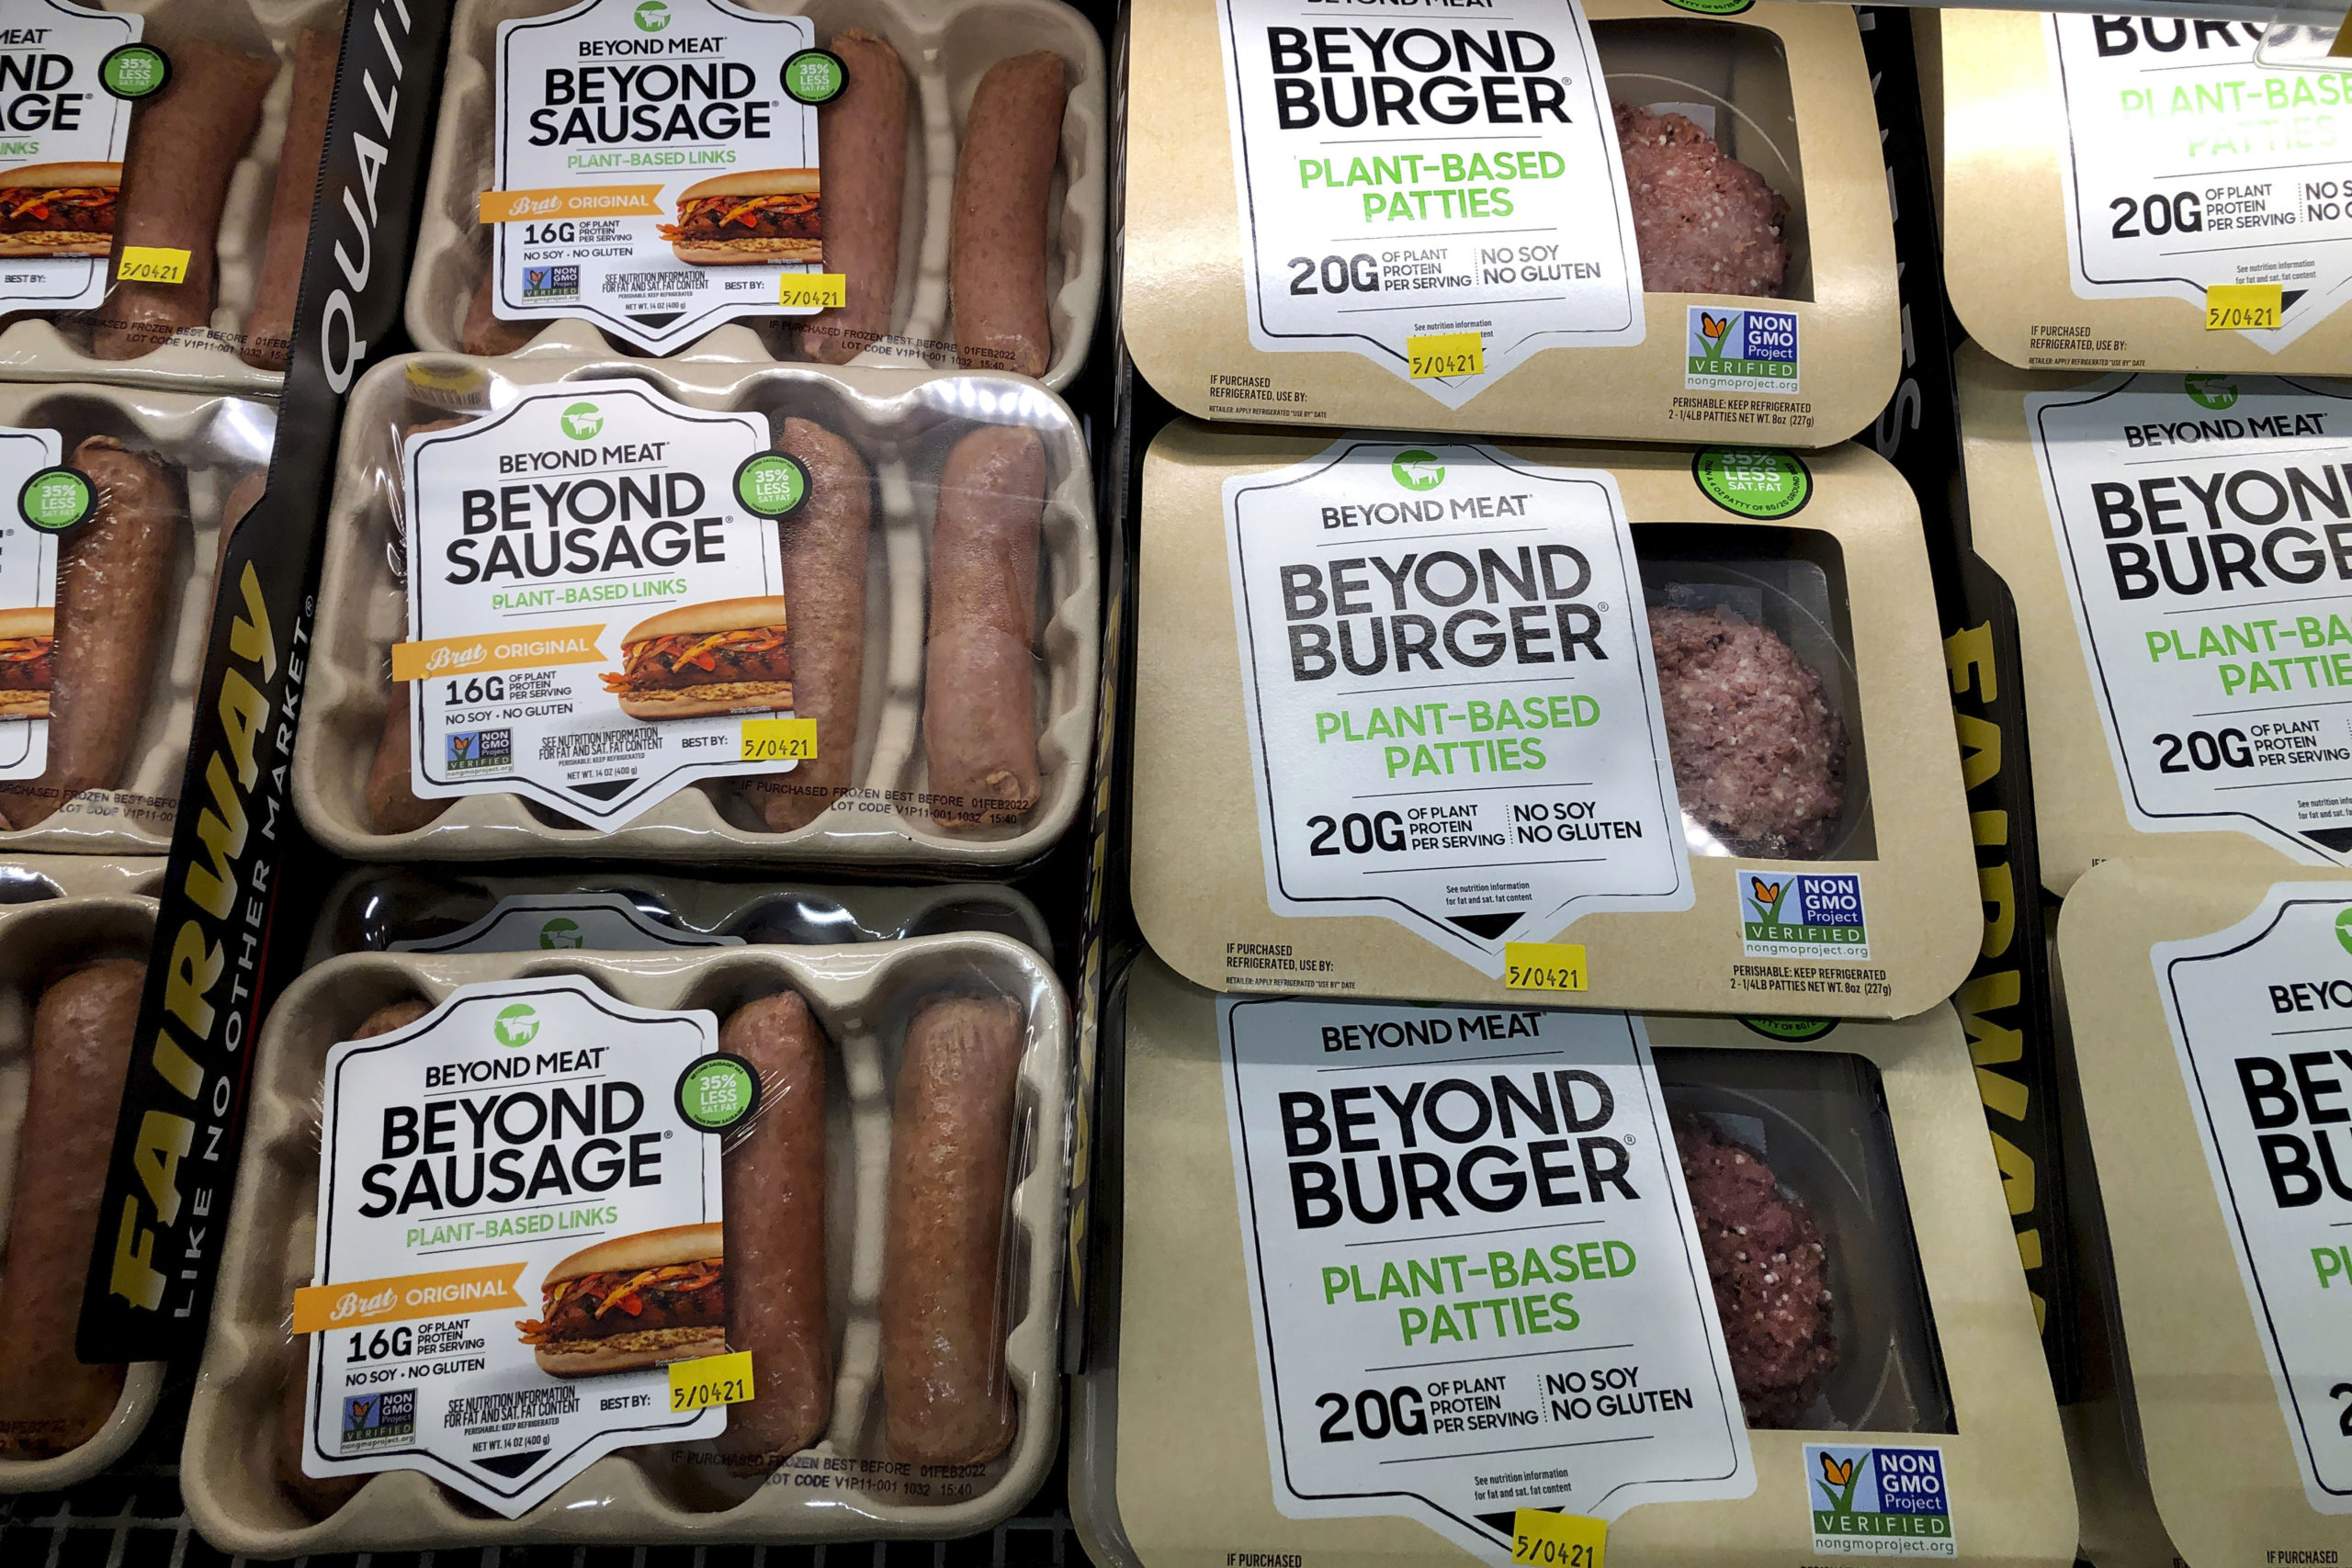 Packages of Beyond Meat's Beyond Burgers and Beyond Sausage are pictured in a New York City store on April 29, 2021.